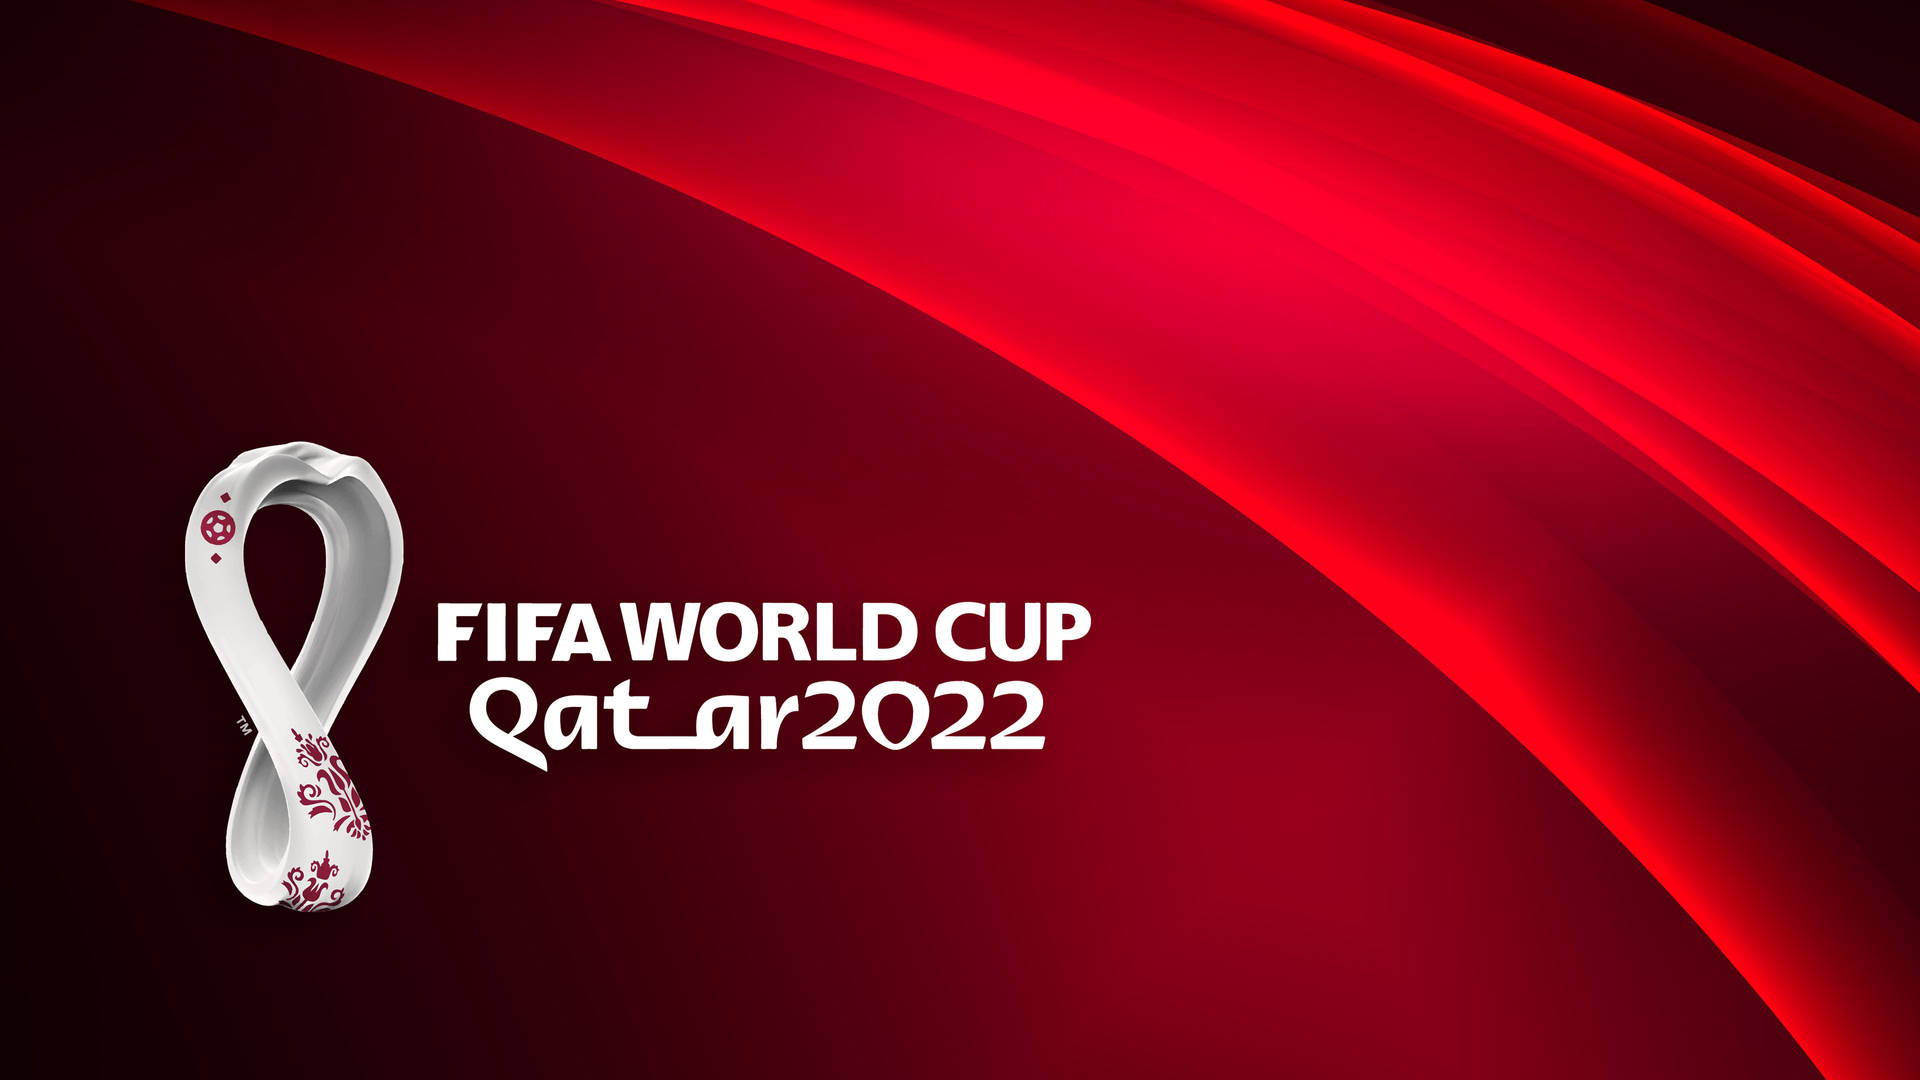 Welcome To Qatar 2022, The Next Edition Of The World Cup! Background